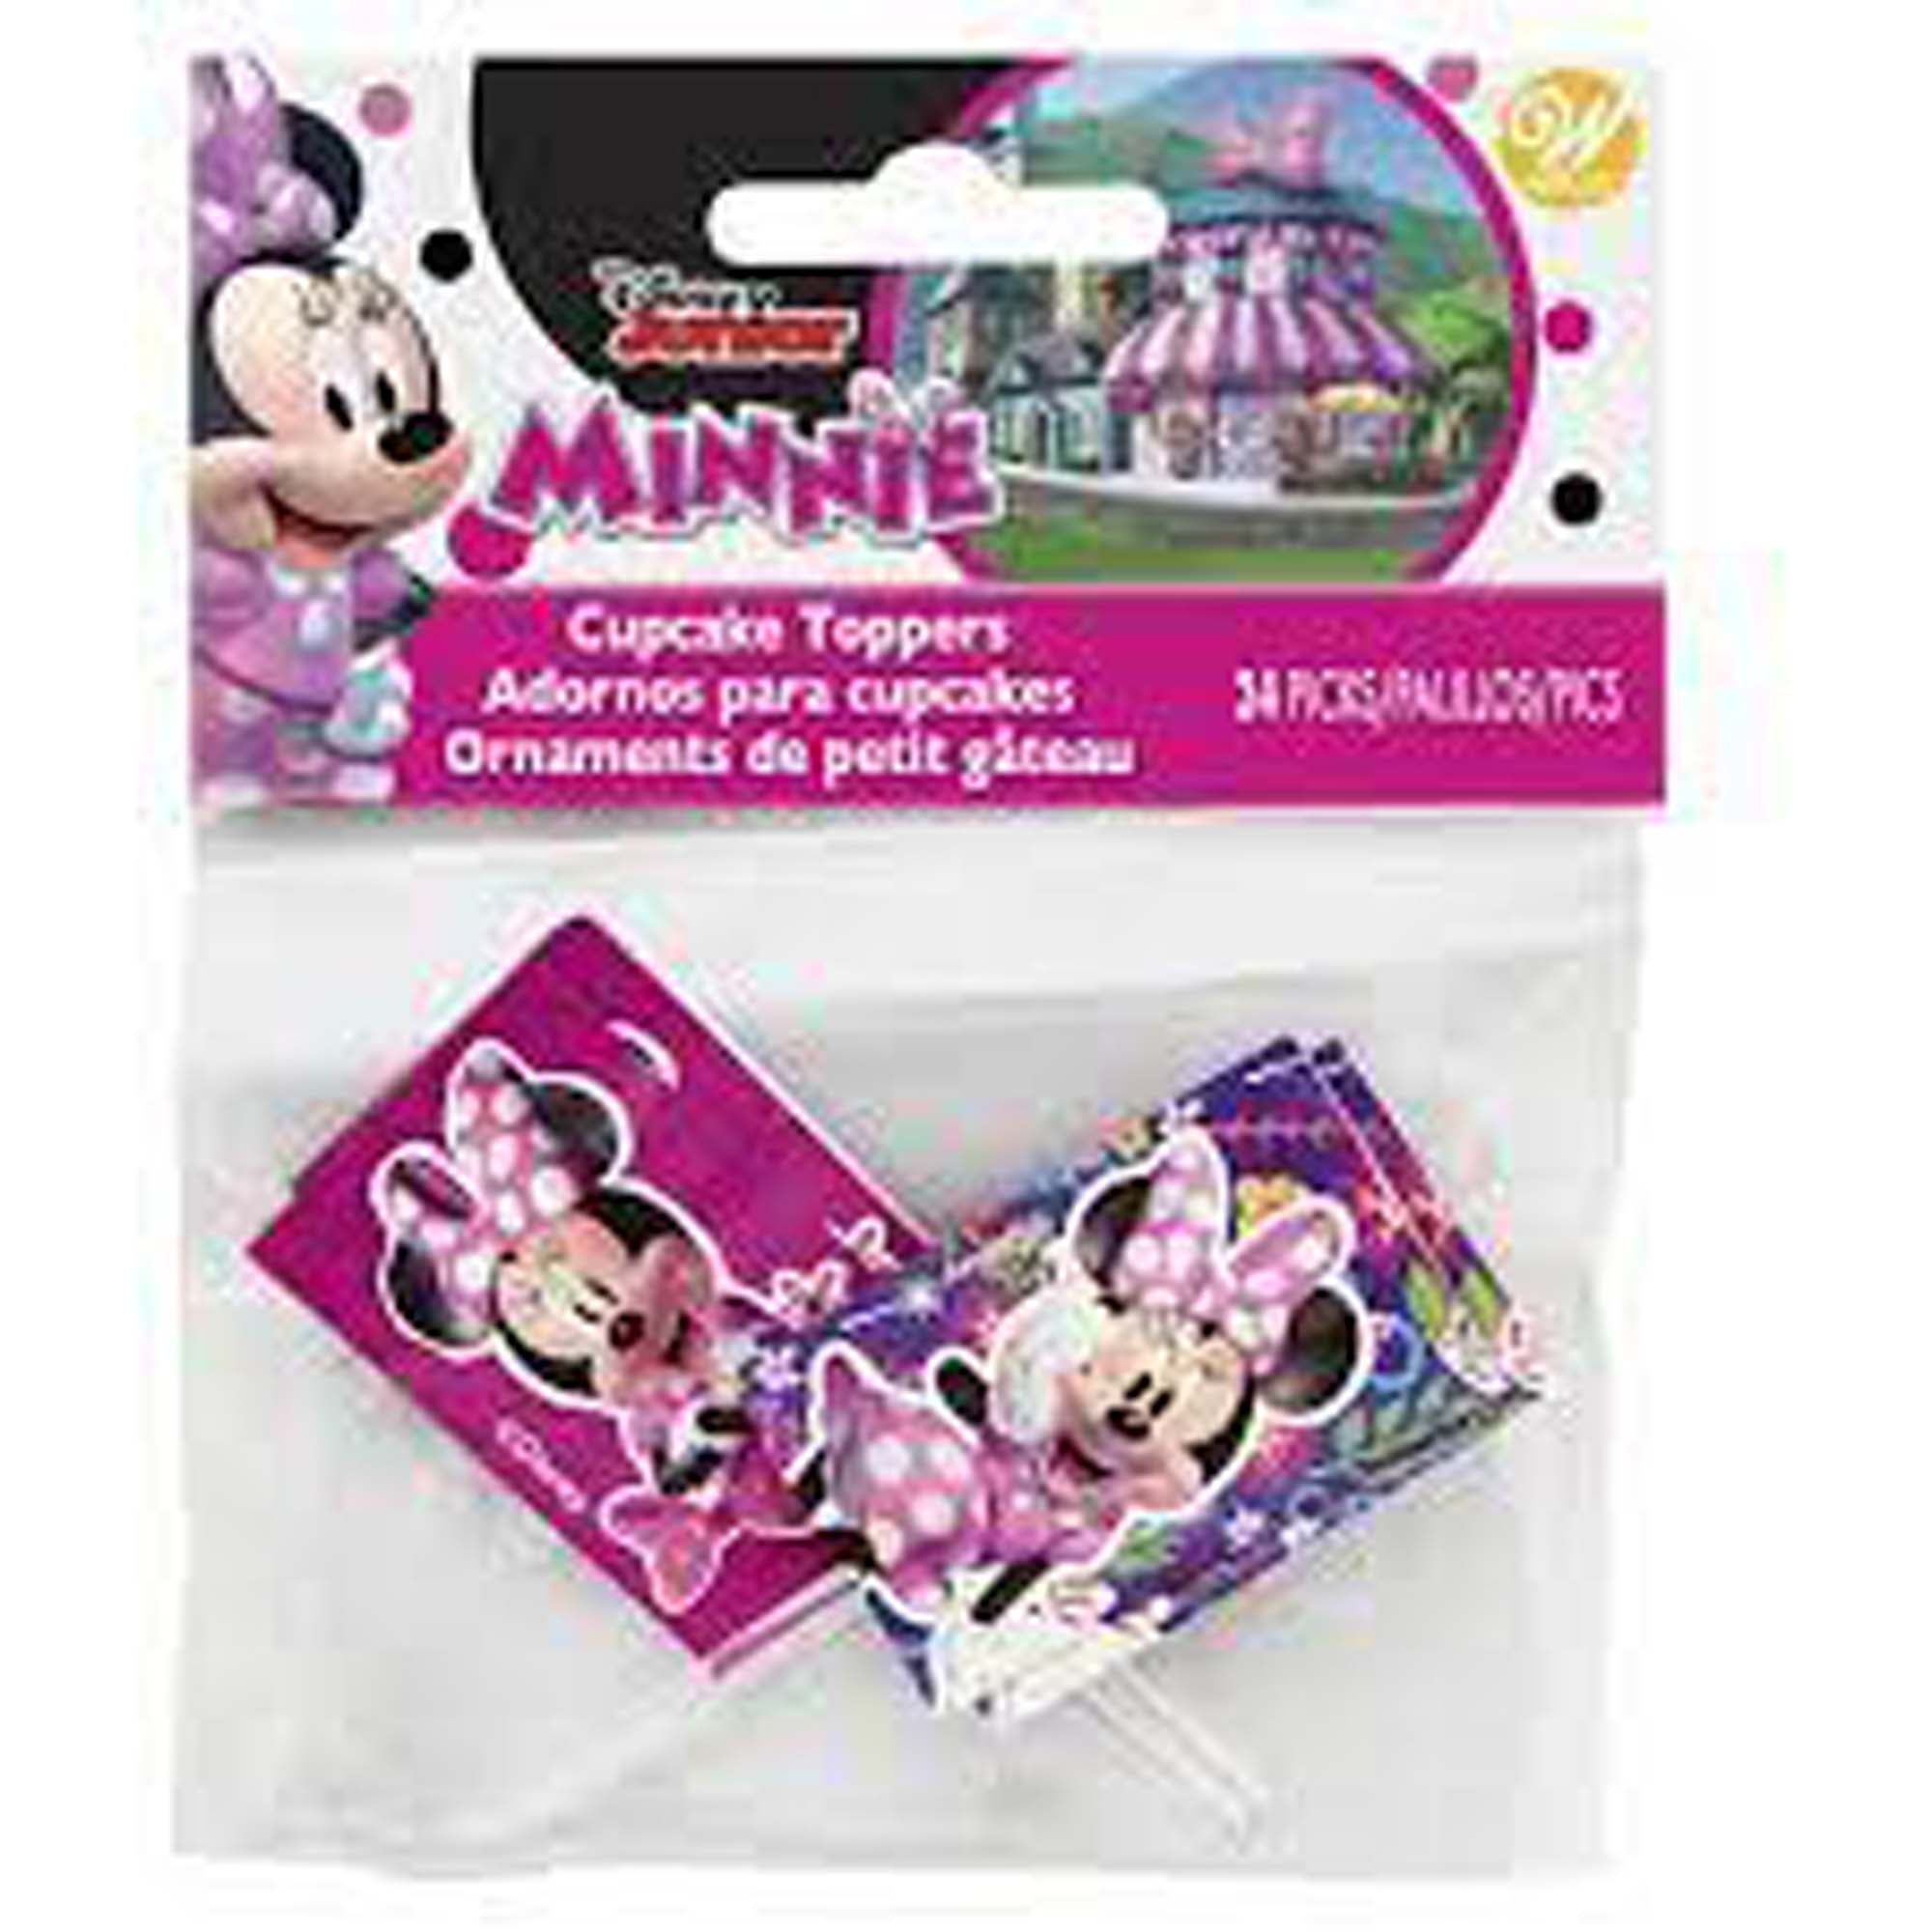 Minnie Mouse Fun Picks, 24 count